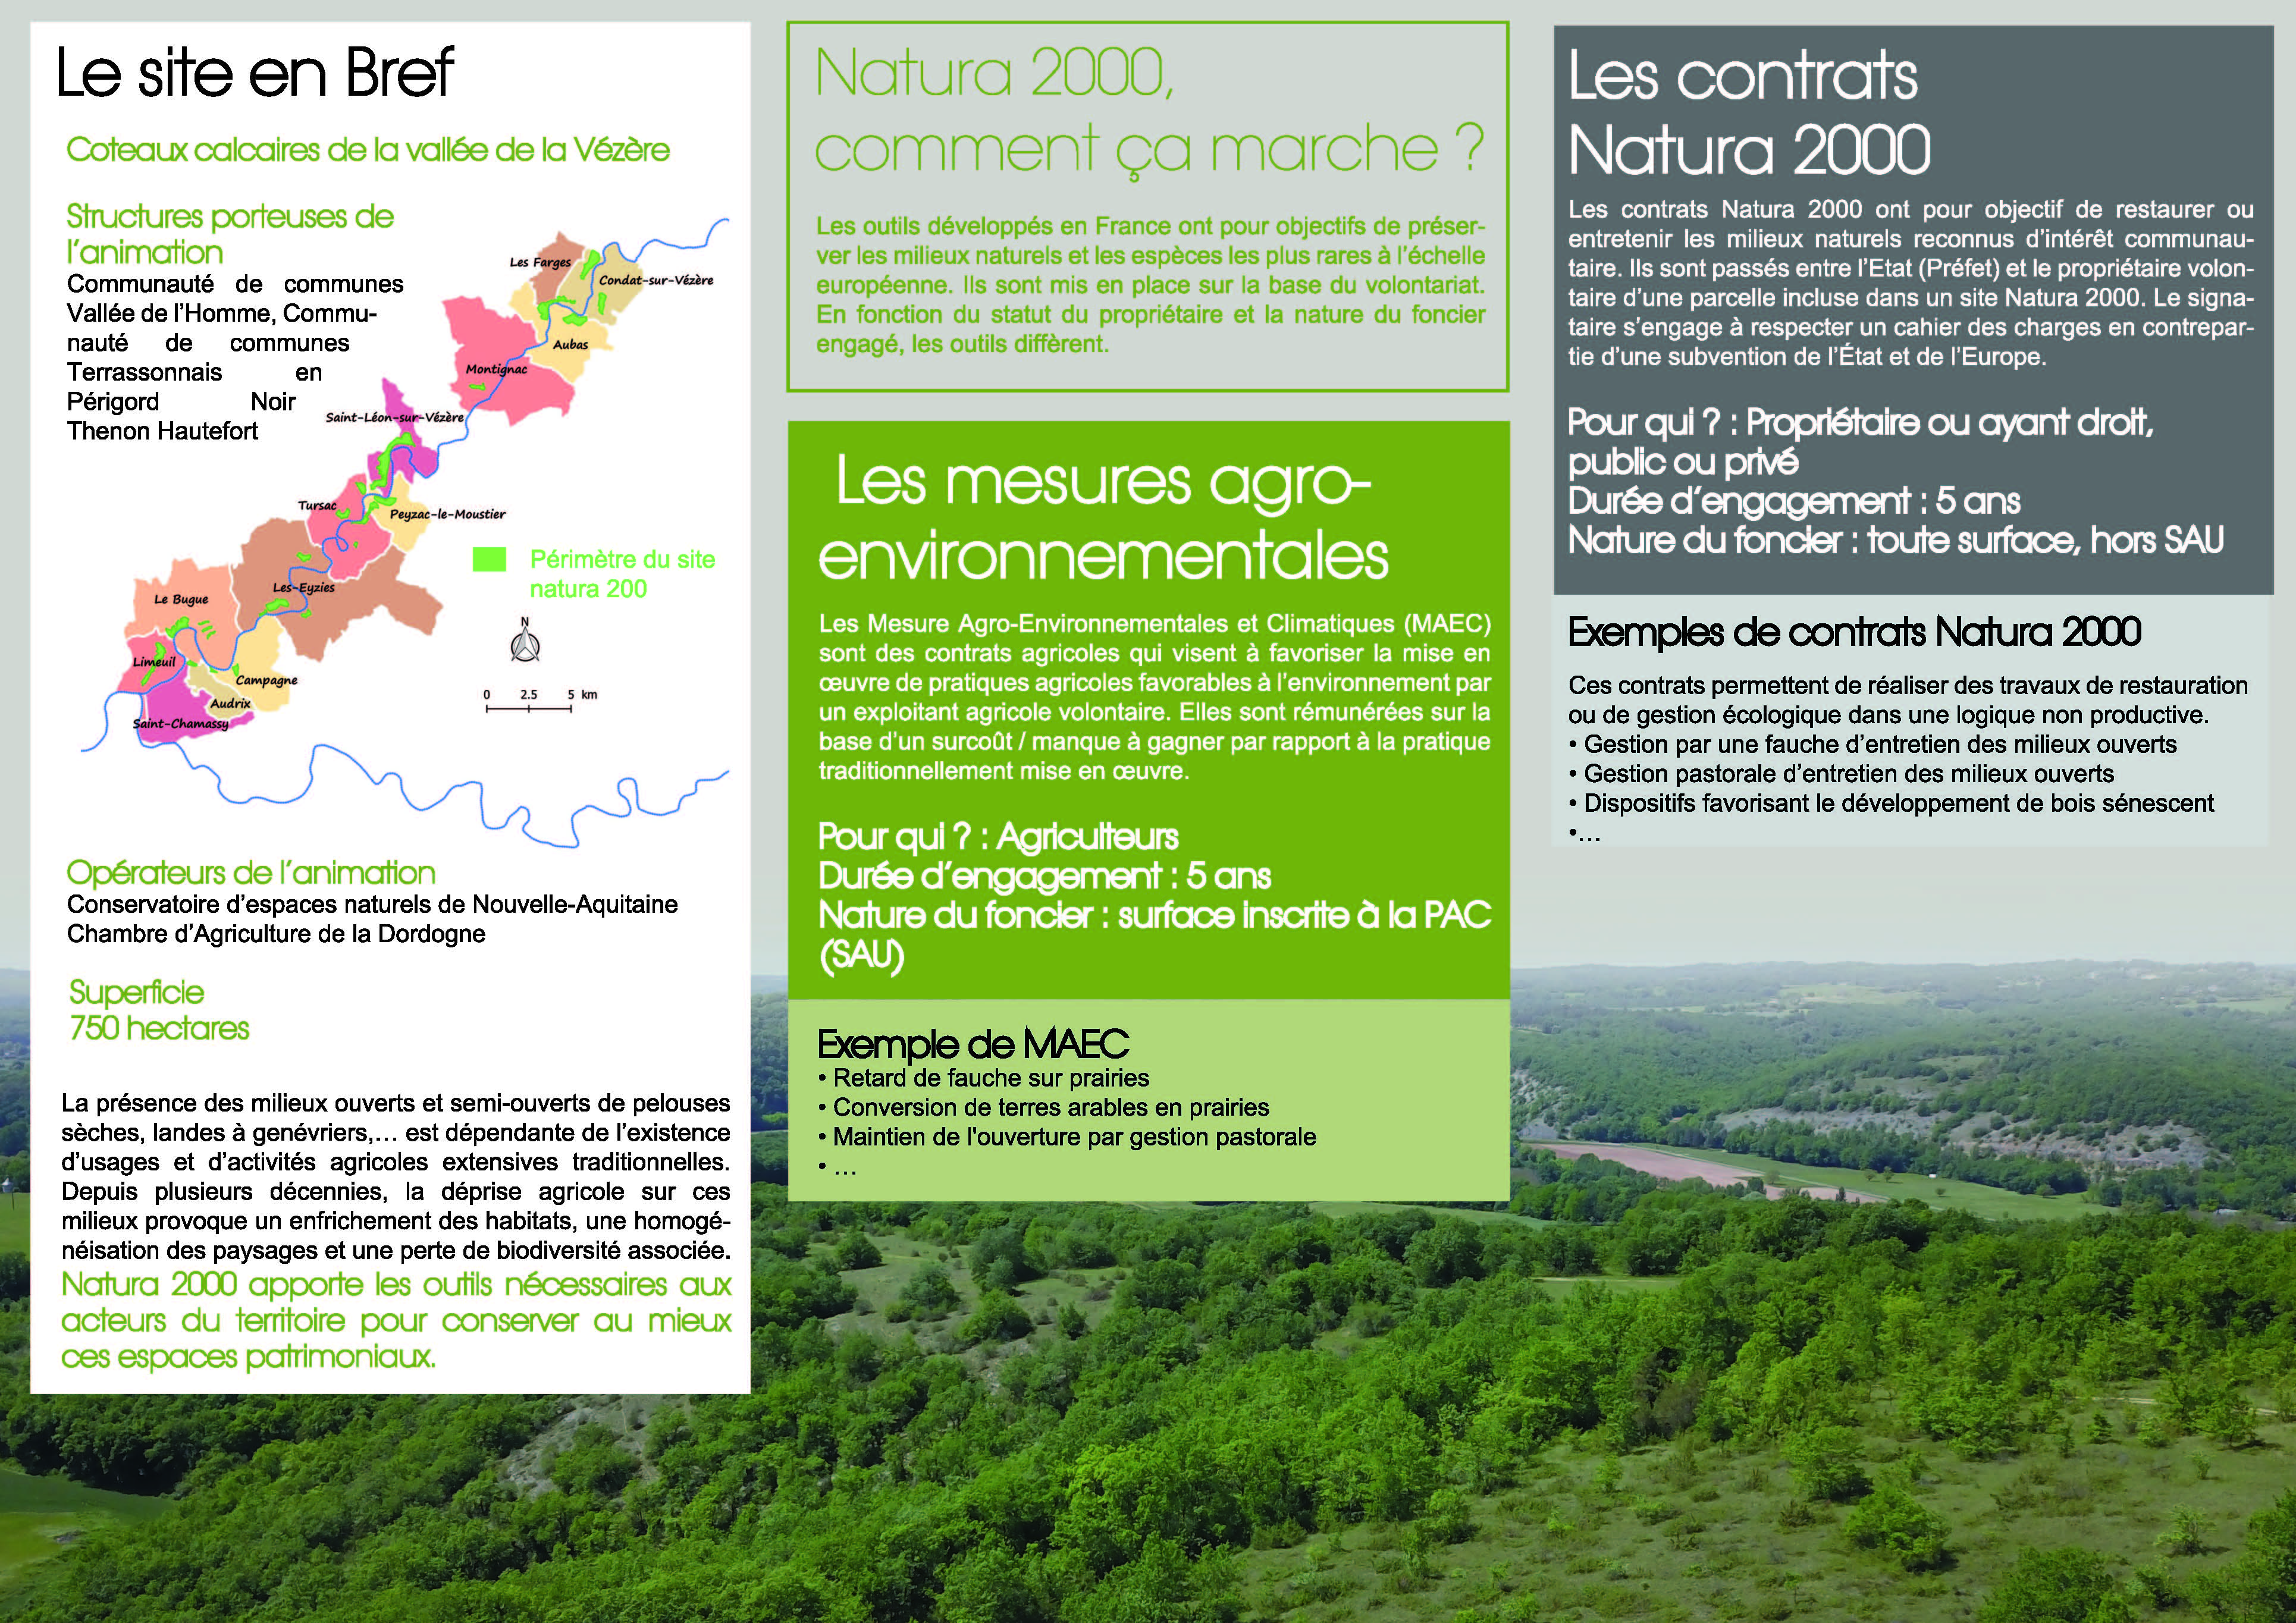 vallee_vezere_outil_gestion_Page_2.jpg